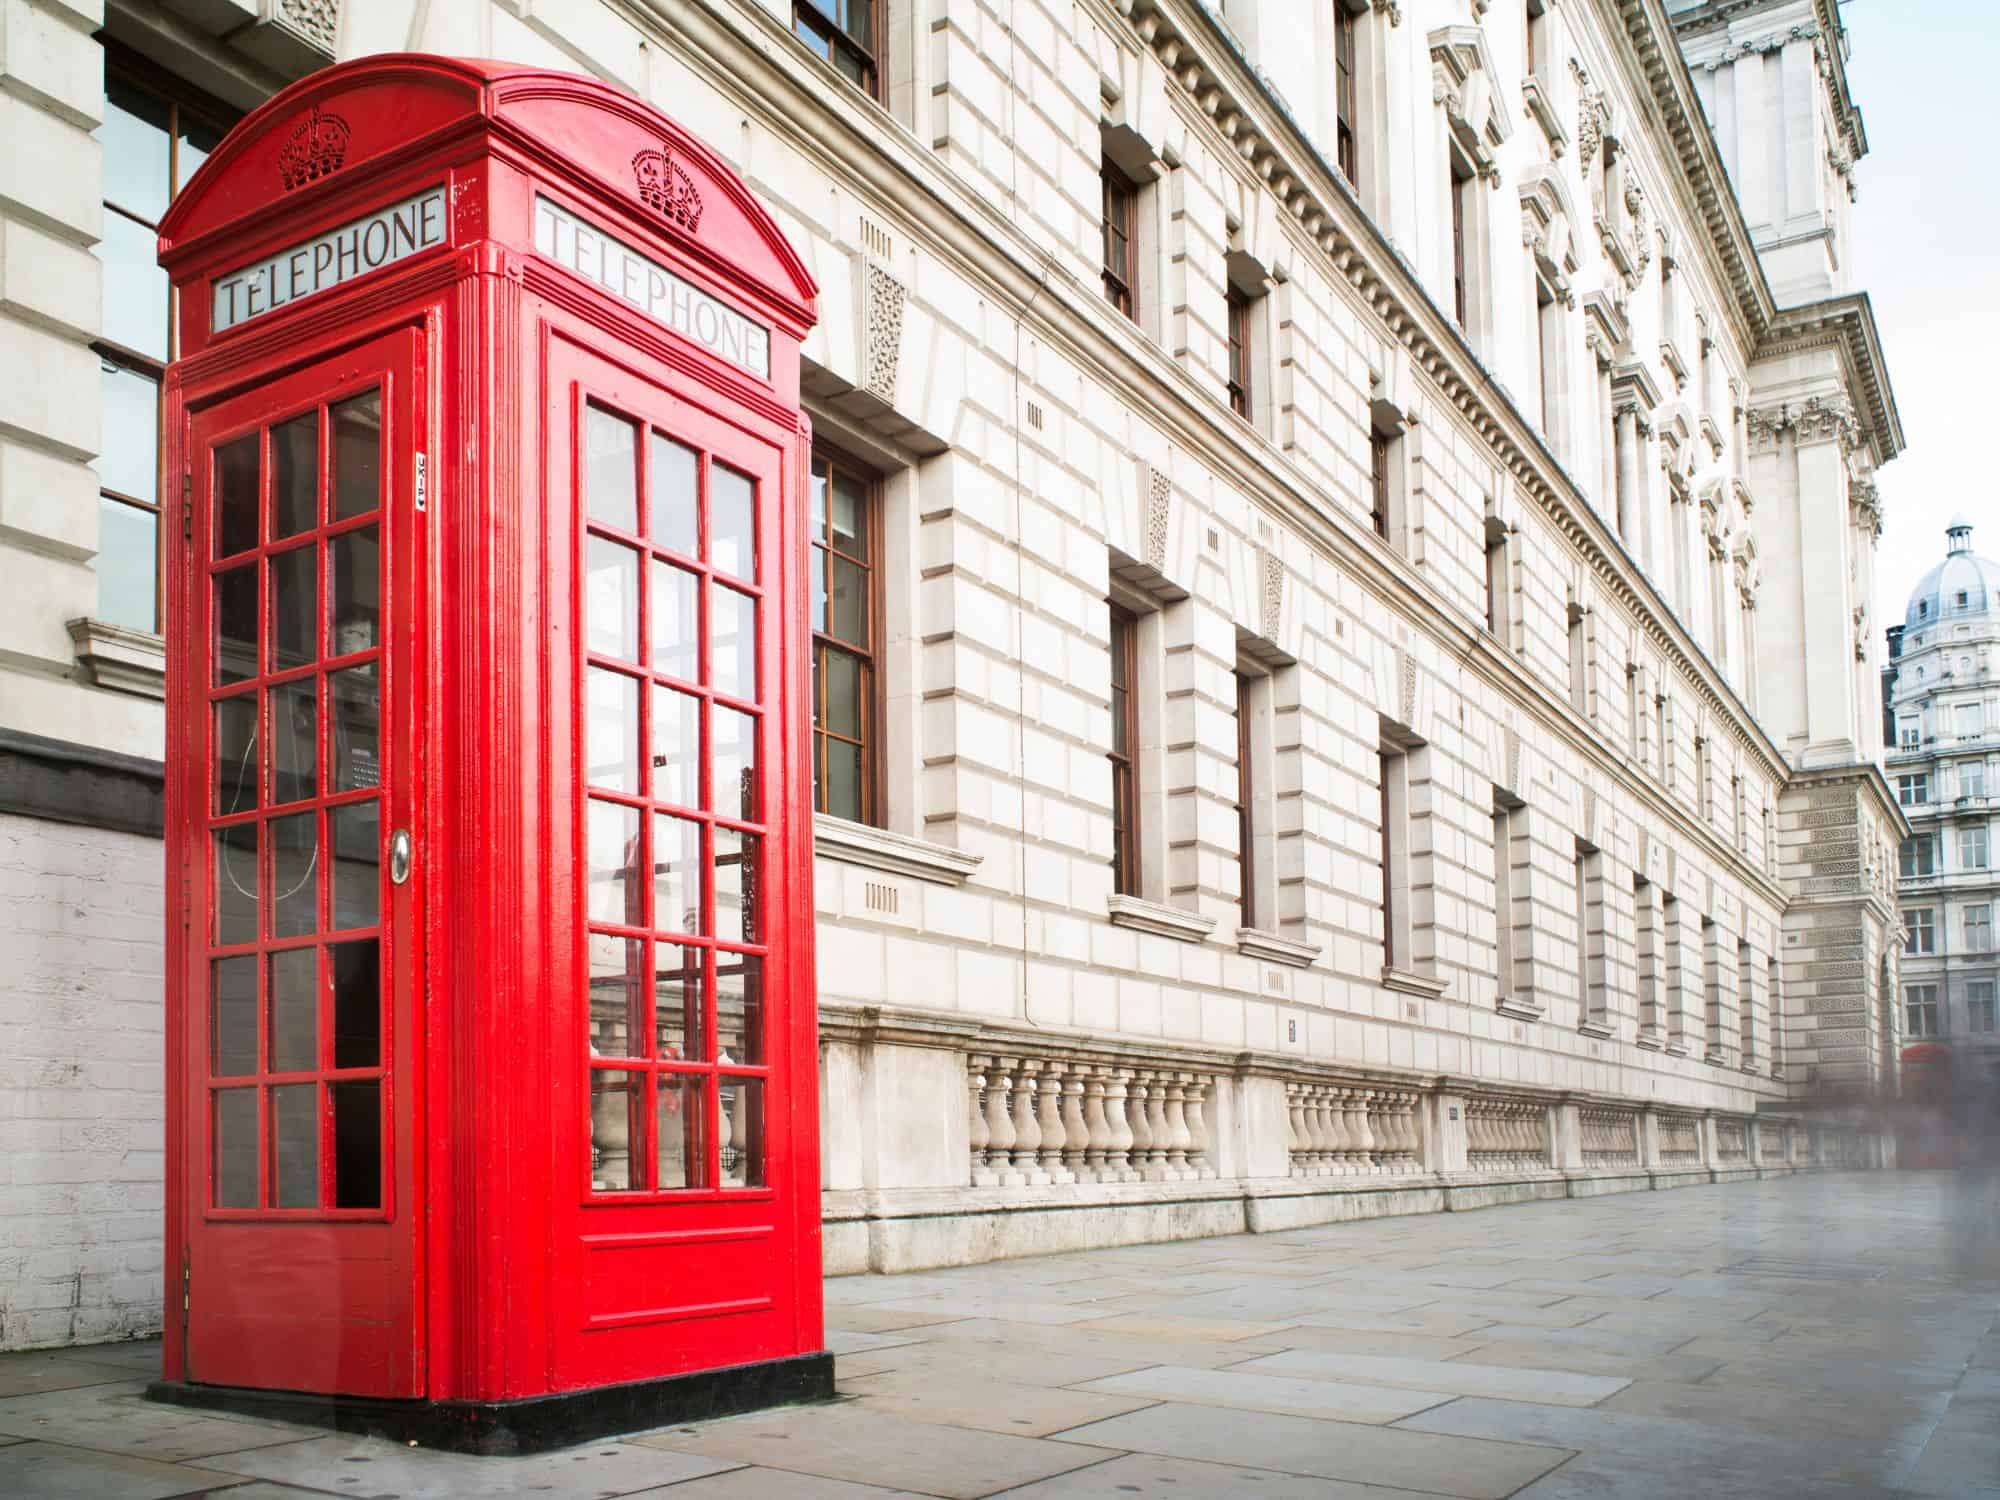 London Phonebox - how to connect when travelling in Europe